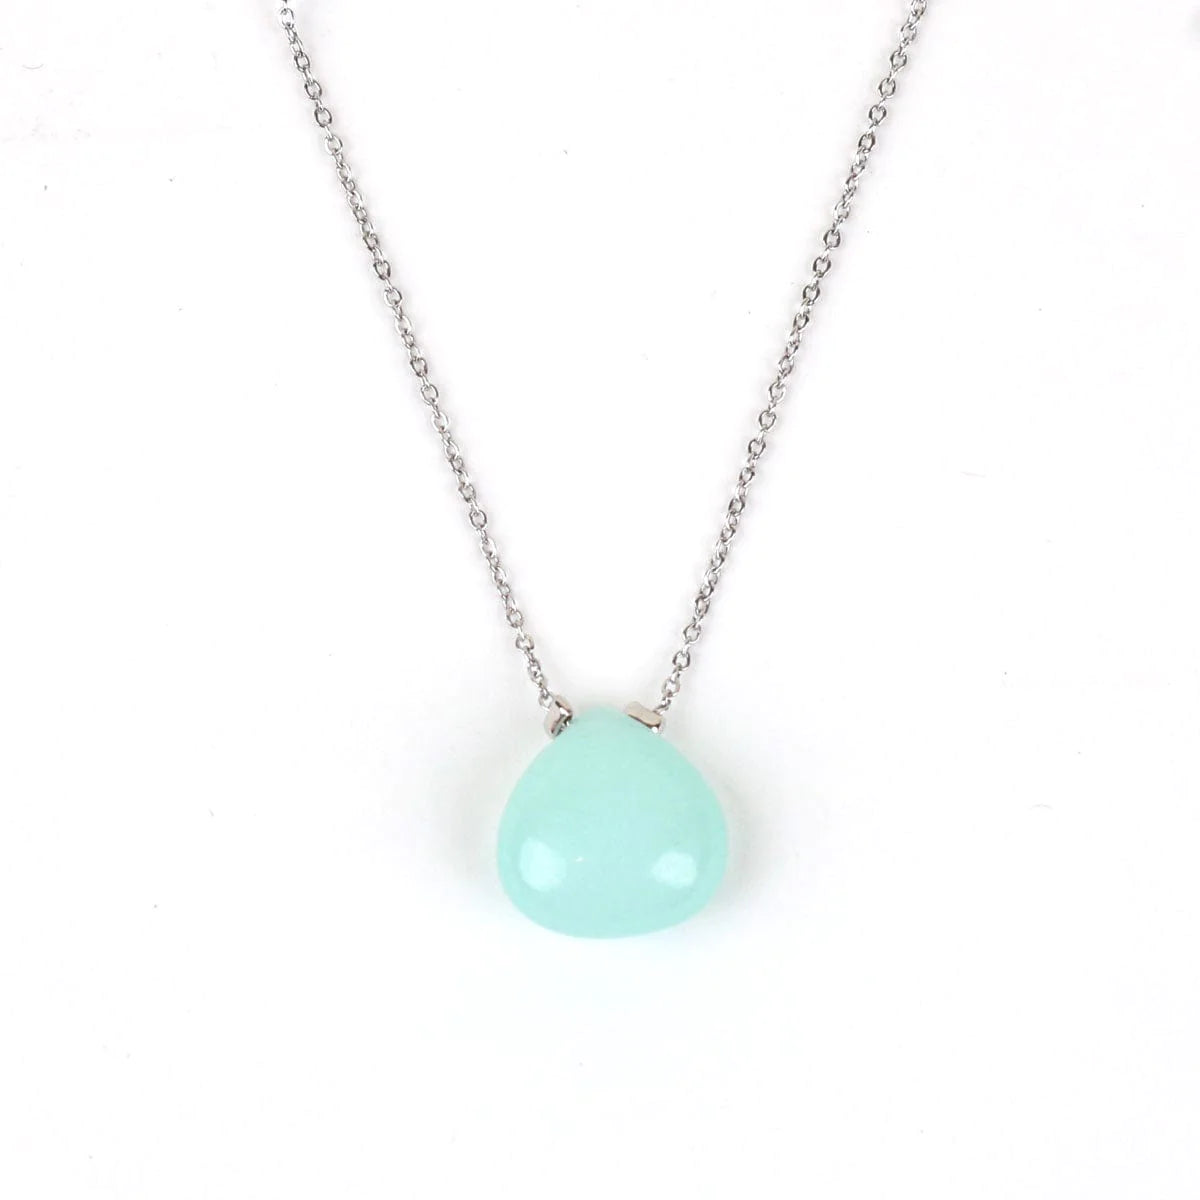 Relaxus - Vitue Stone Crystal Necklace